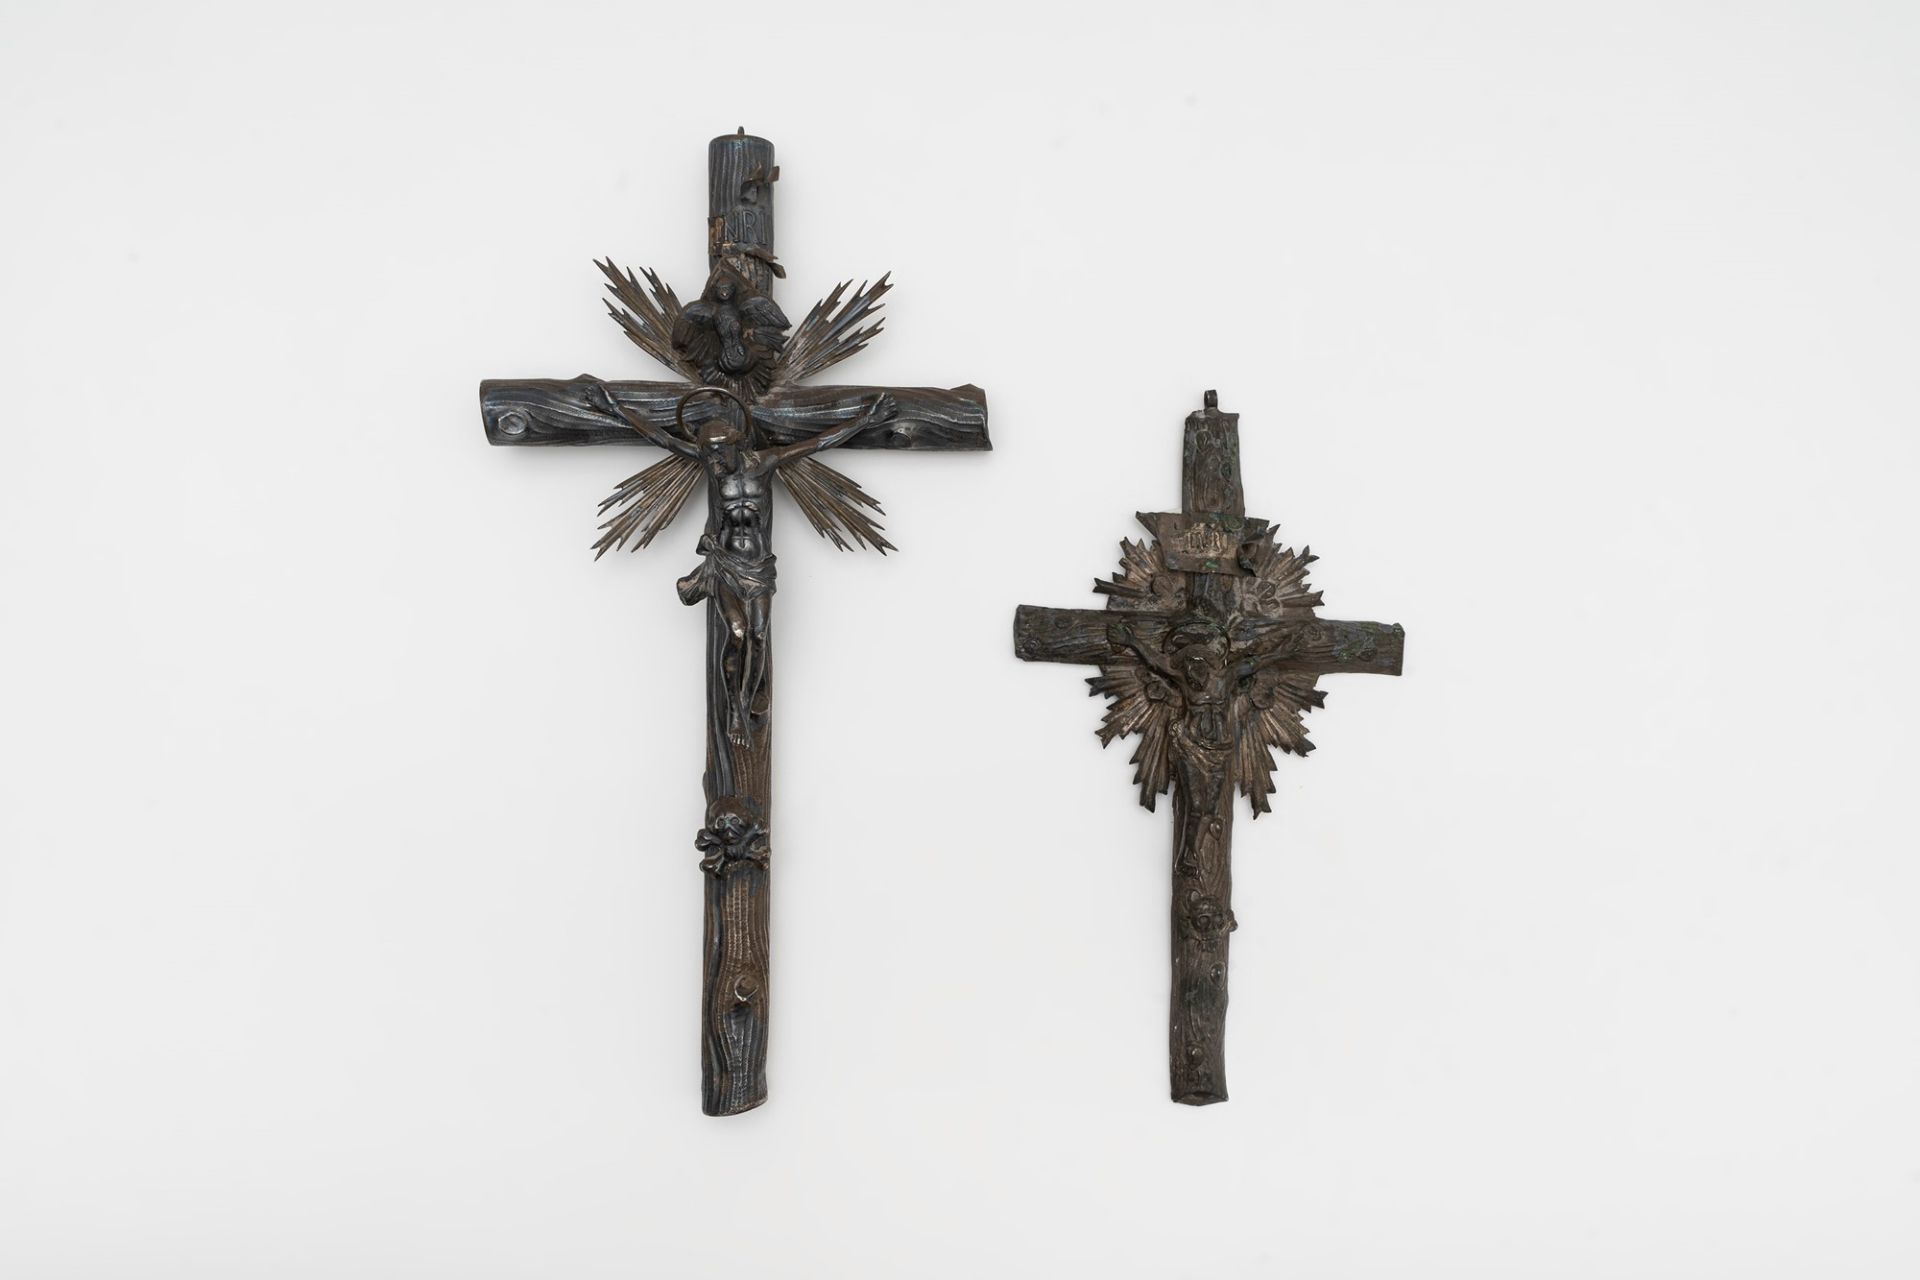 Lot consisting of two silver crucifixes and three miniatures, late 19th century - early 20th century